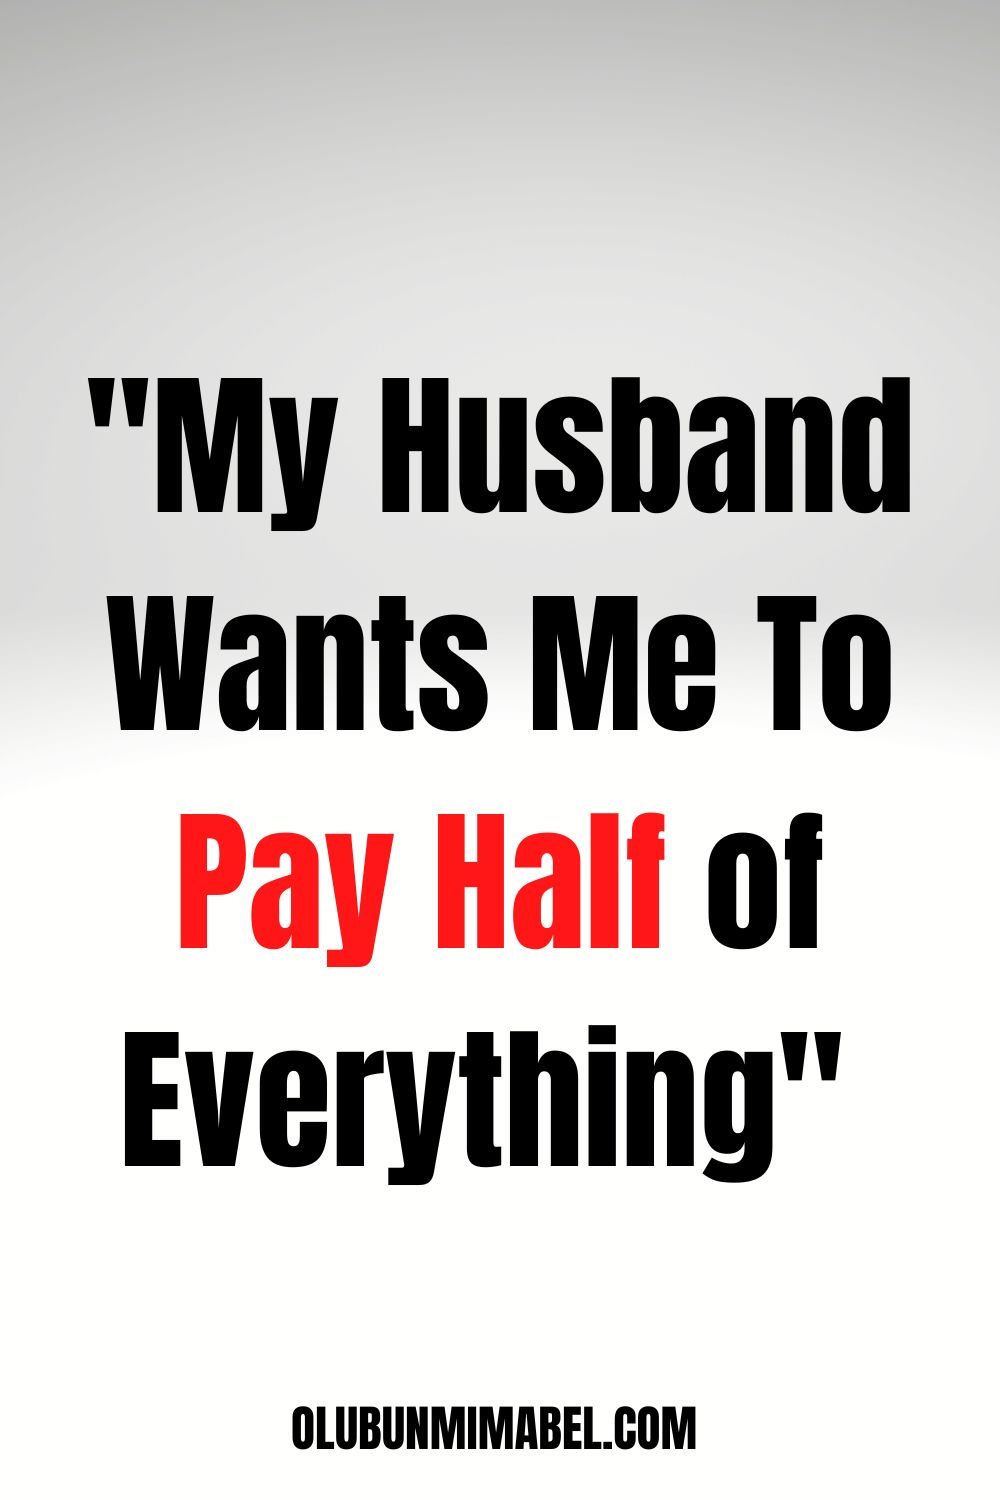 My Husband Wants Me To Pay Half of Everything